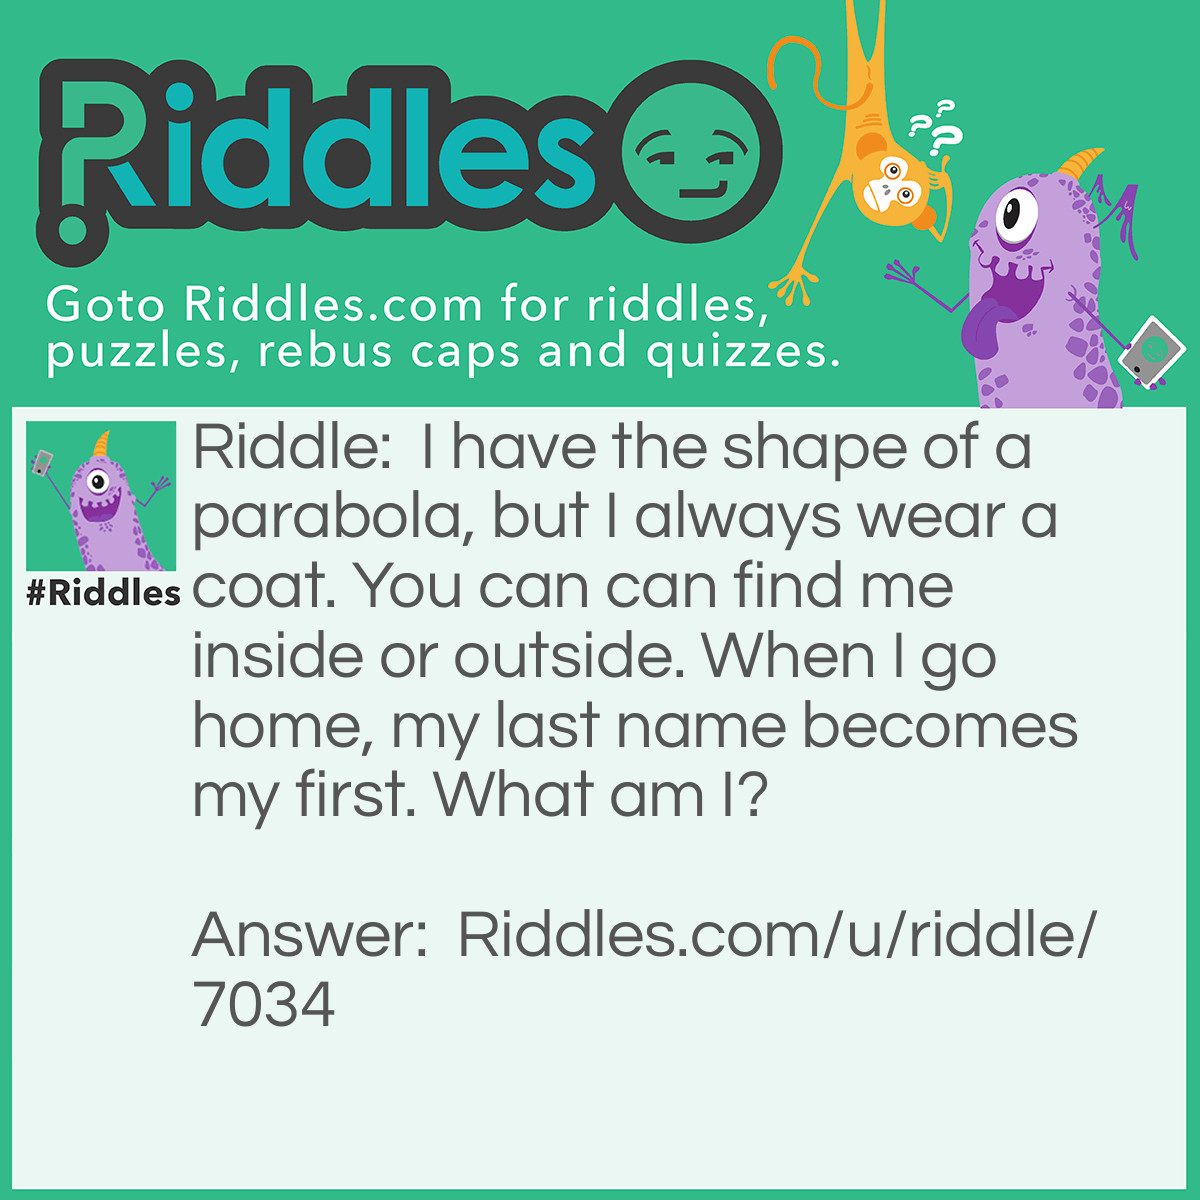 Riddle: I have the shape of a parabola, but I always wear a coat. You can can find me inside or outside. When I go home, my last name becomes my first. What am I? Answer: A taco.